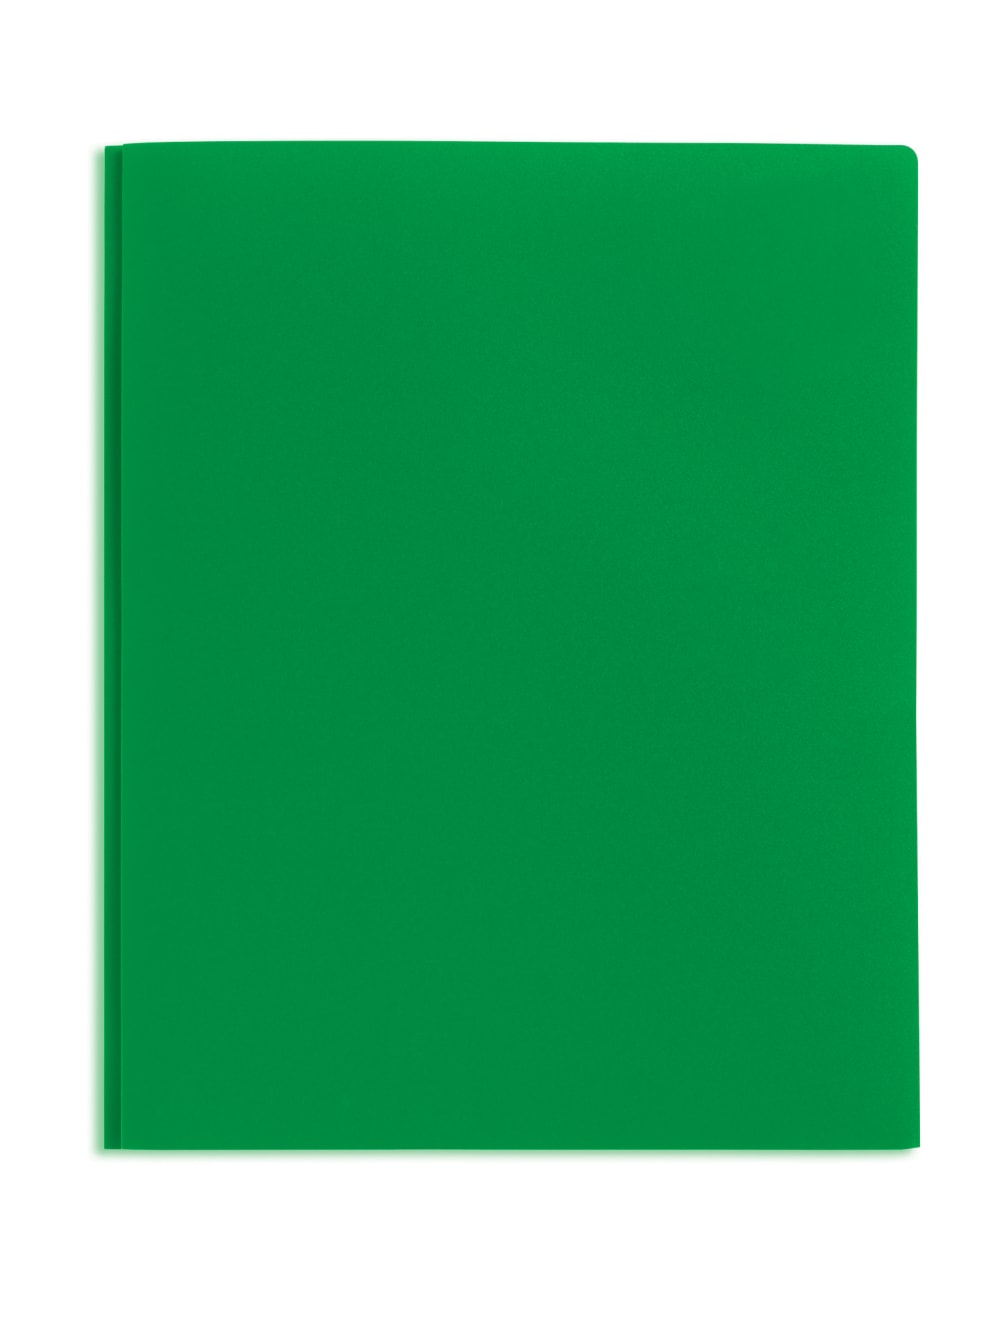 Office Depot® Brand 2-Pocket Poly Folder with Prongs, Letter Size, Green
				
		        		












	
			
				
				 
					Item # 
					
						
							
							
								952959